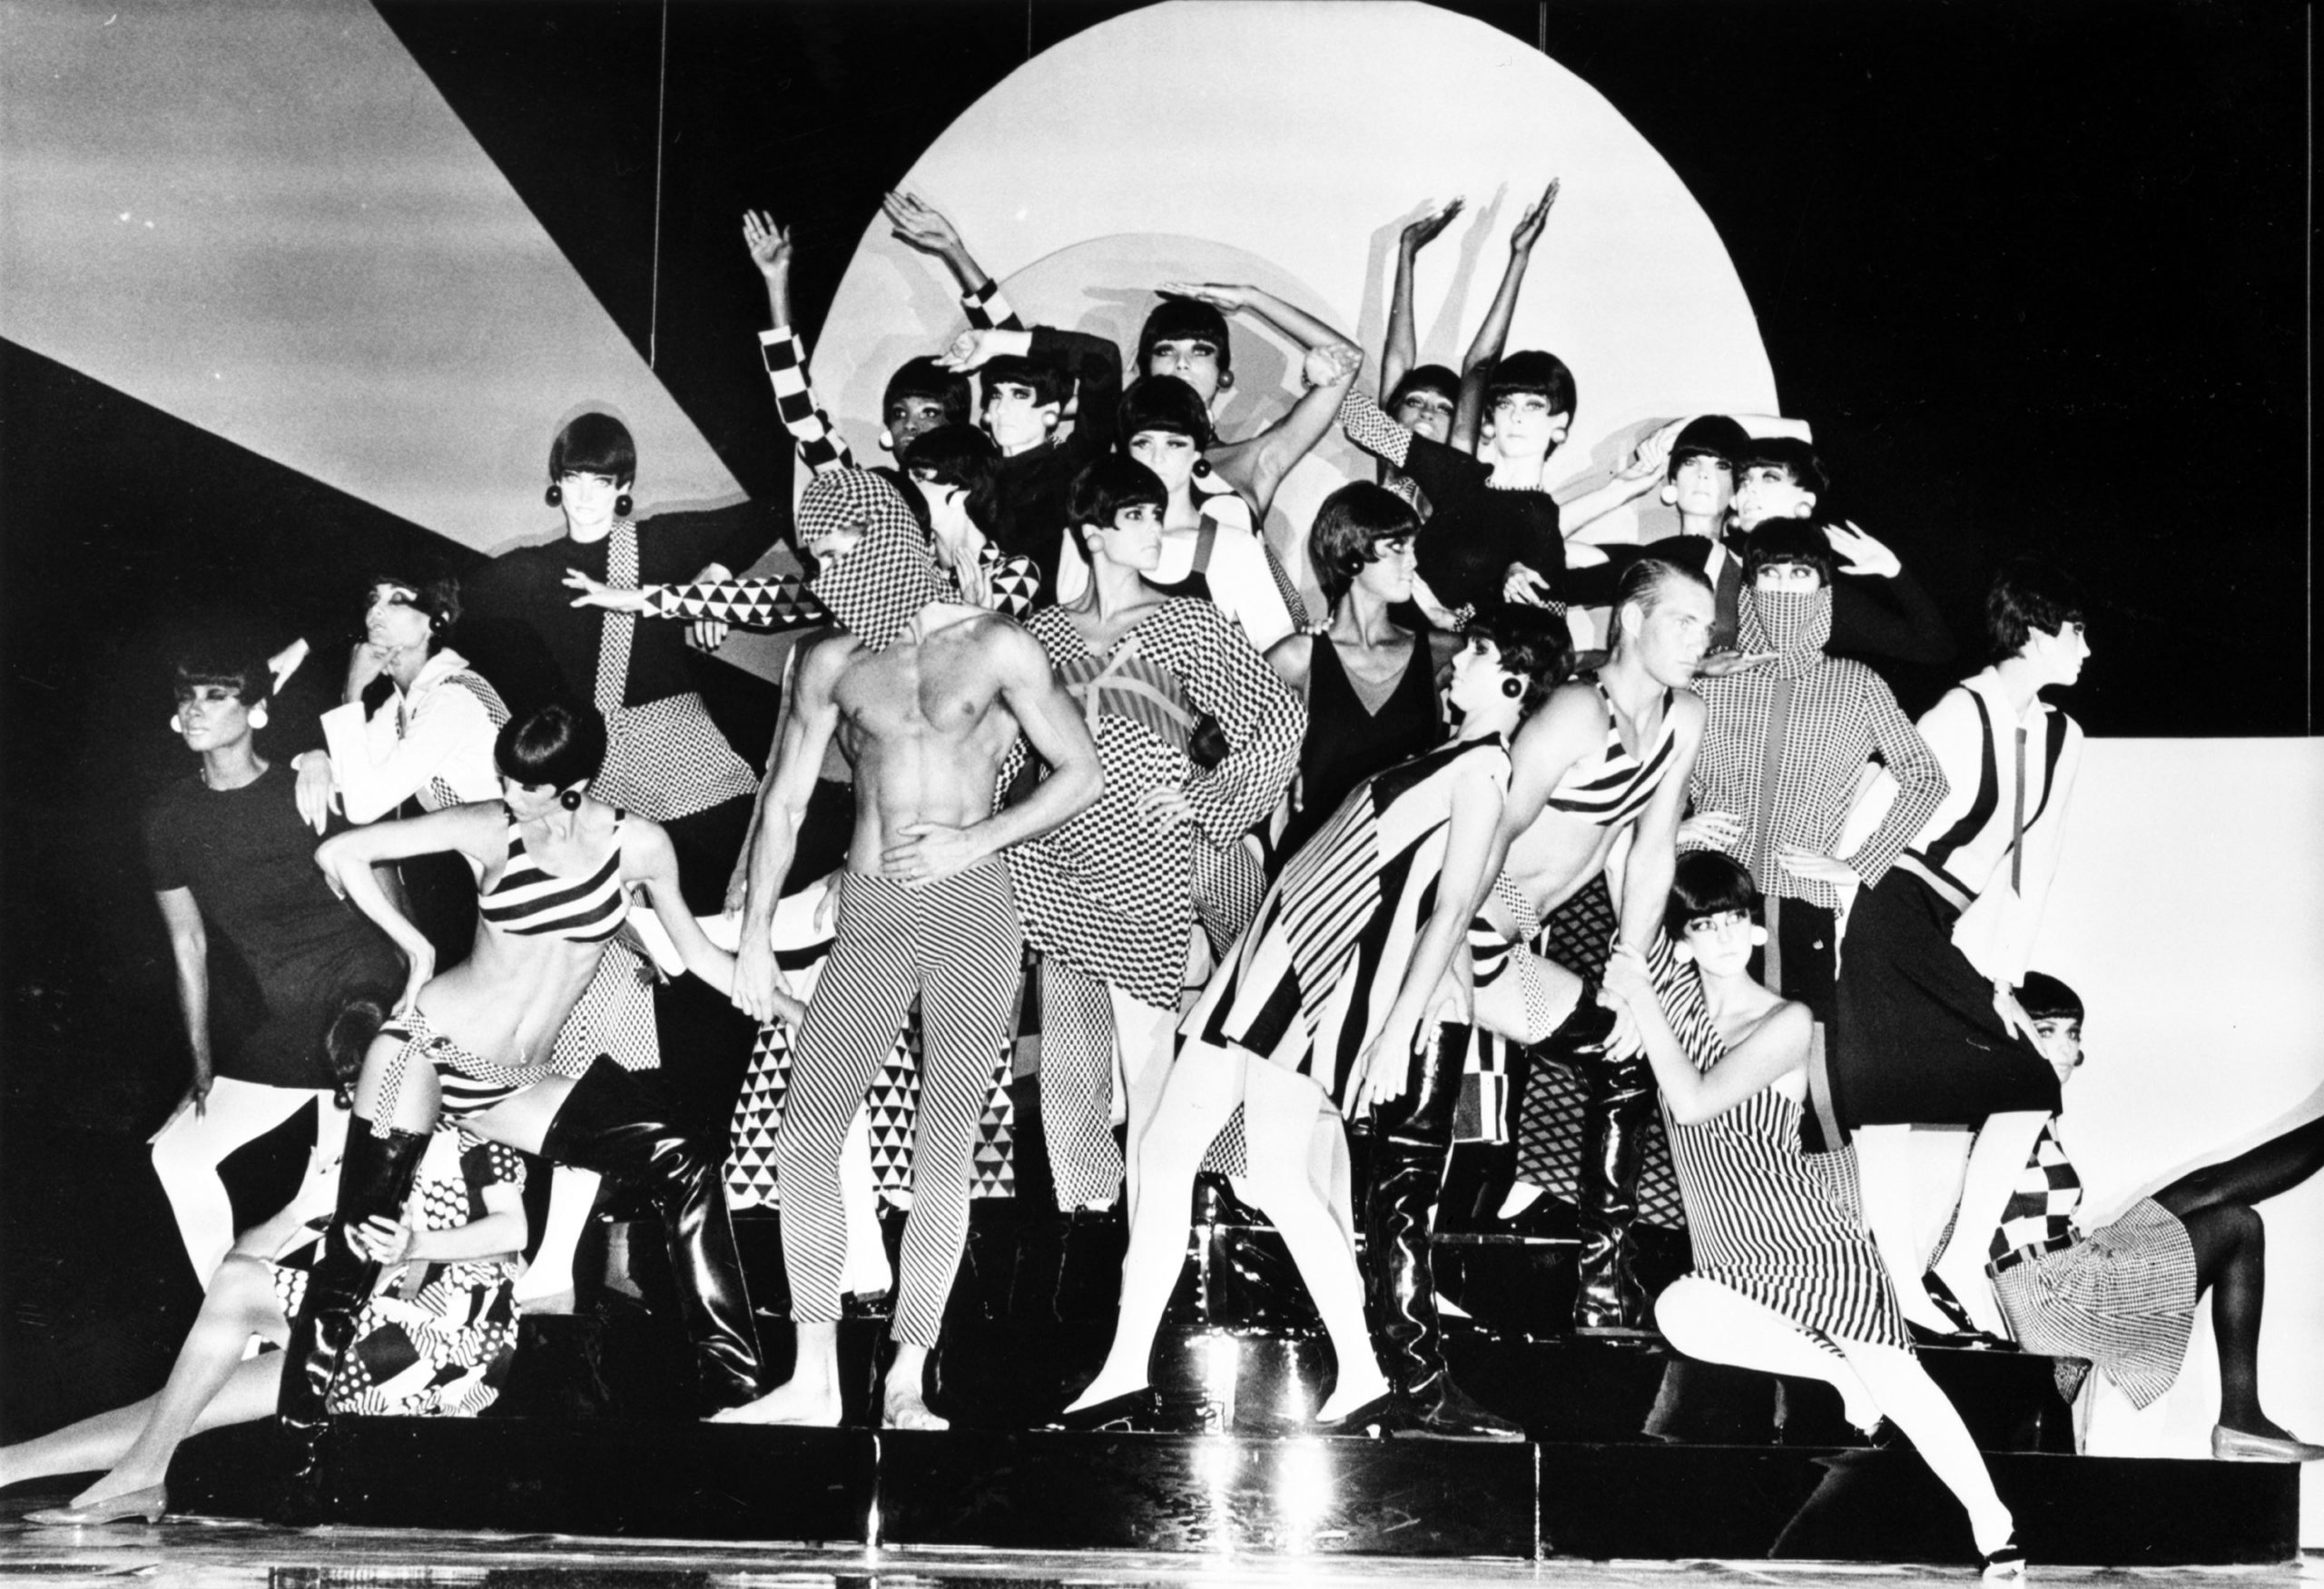 Rudi Gernreich fashions at the Wiltern, 1985. Photo Collection, Los Angeles Public Library.